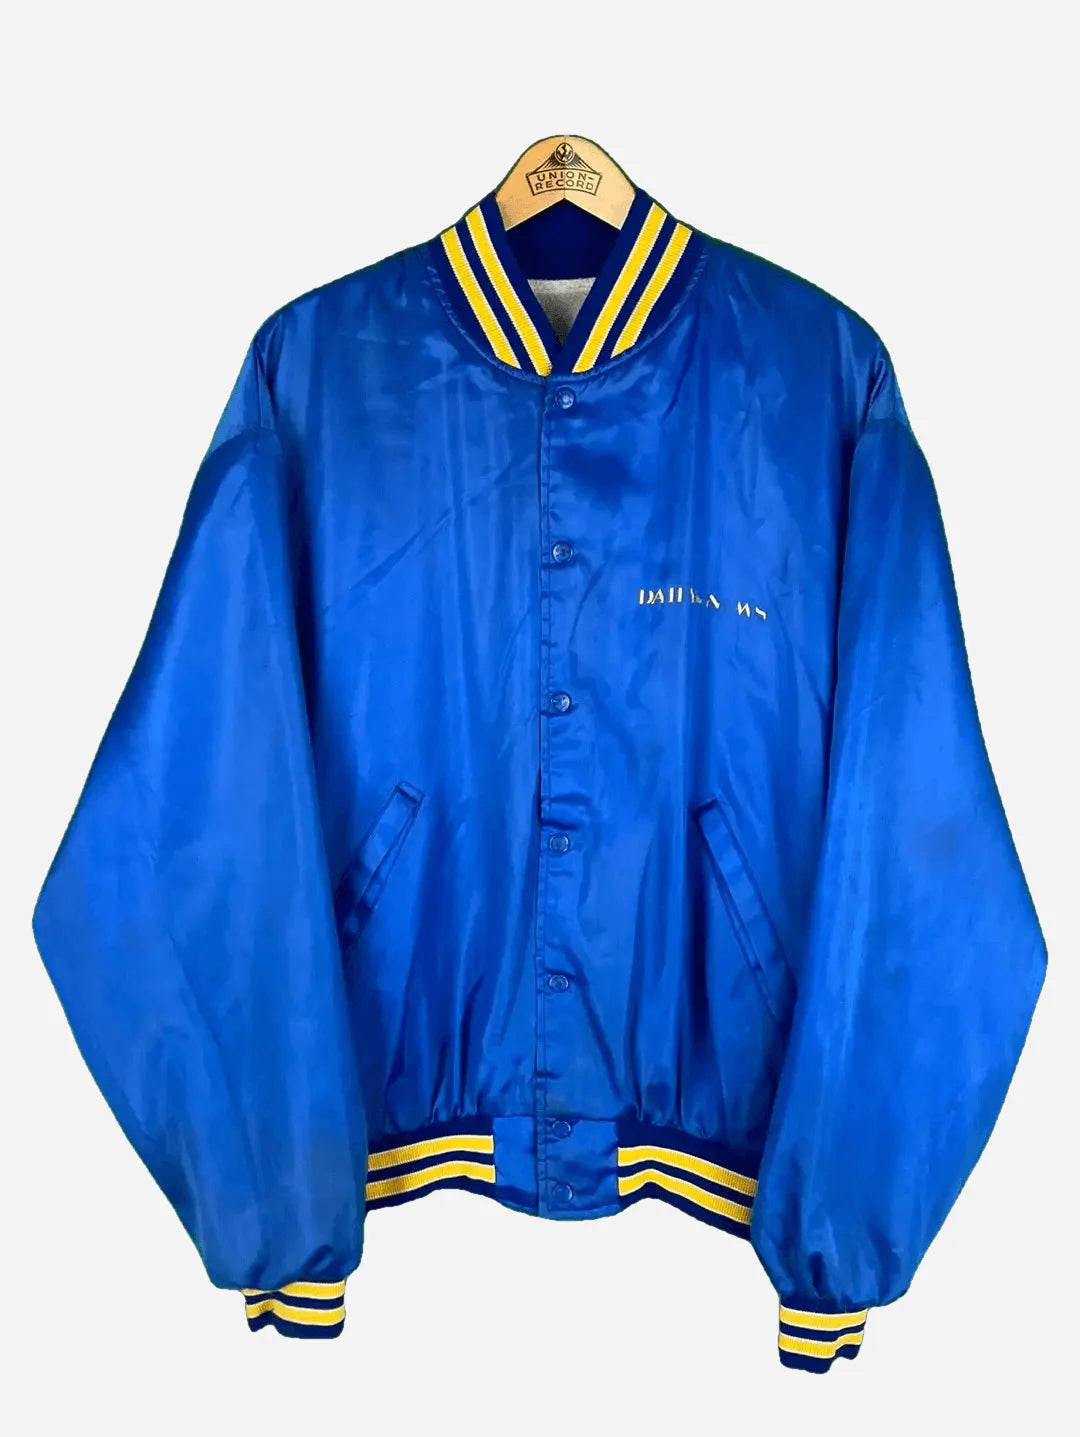 Daily News 1999 College Jacket (XL)